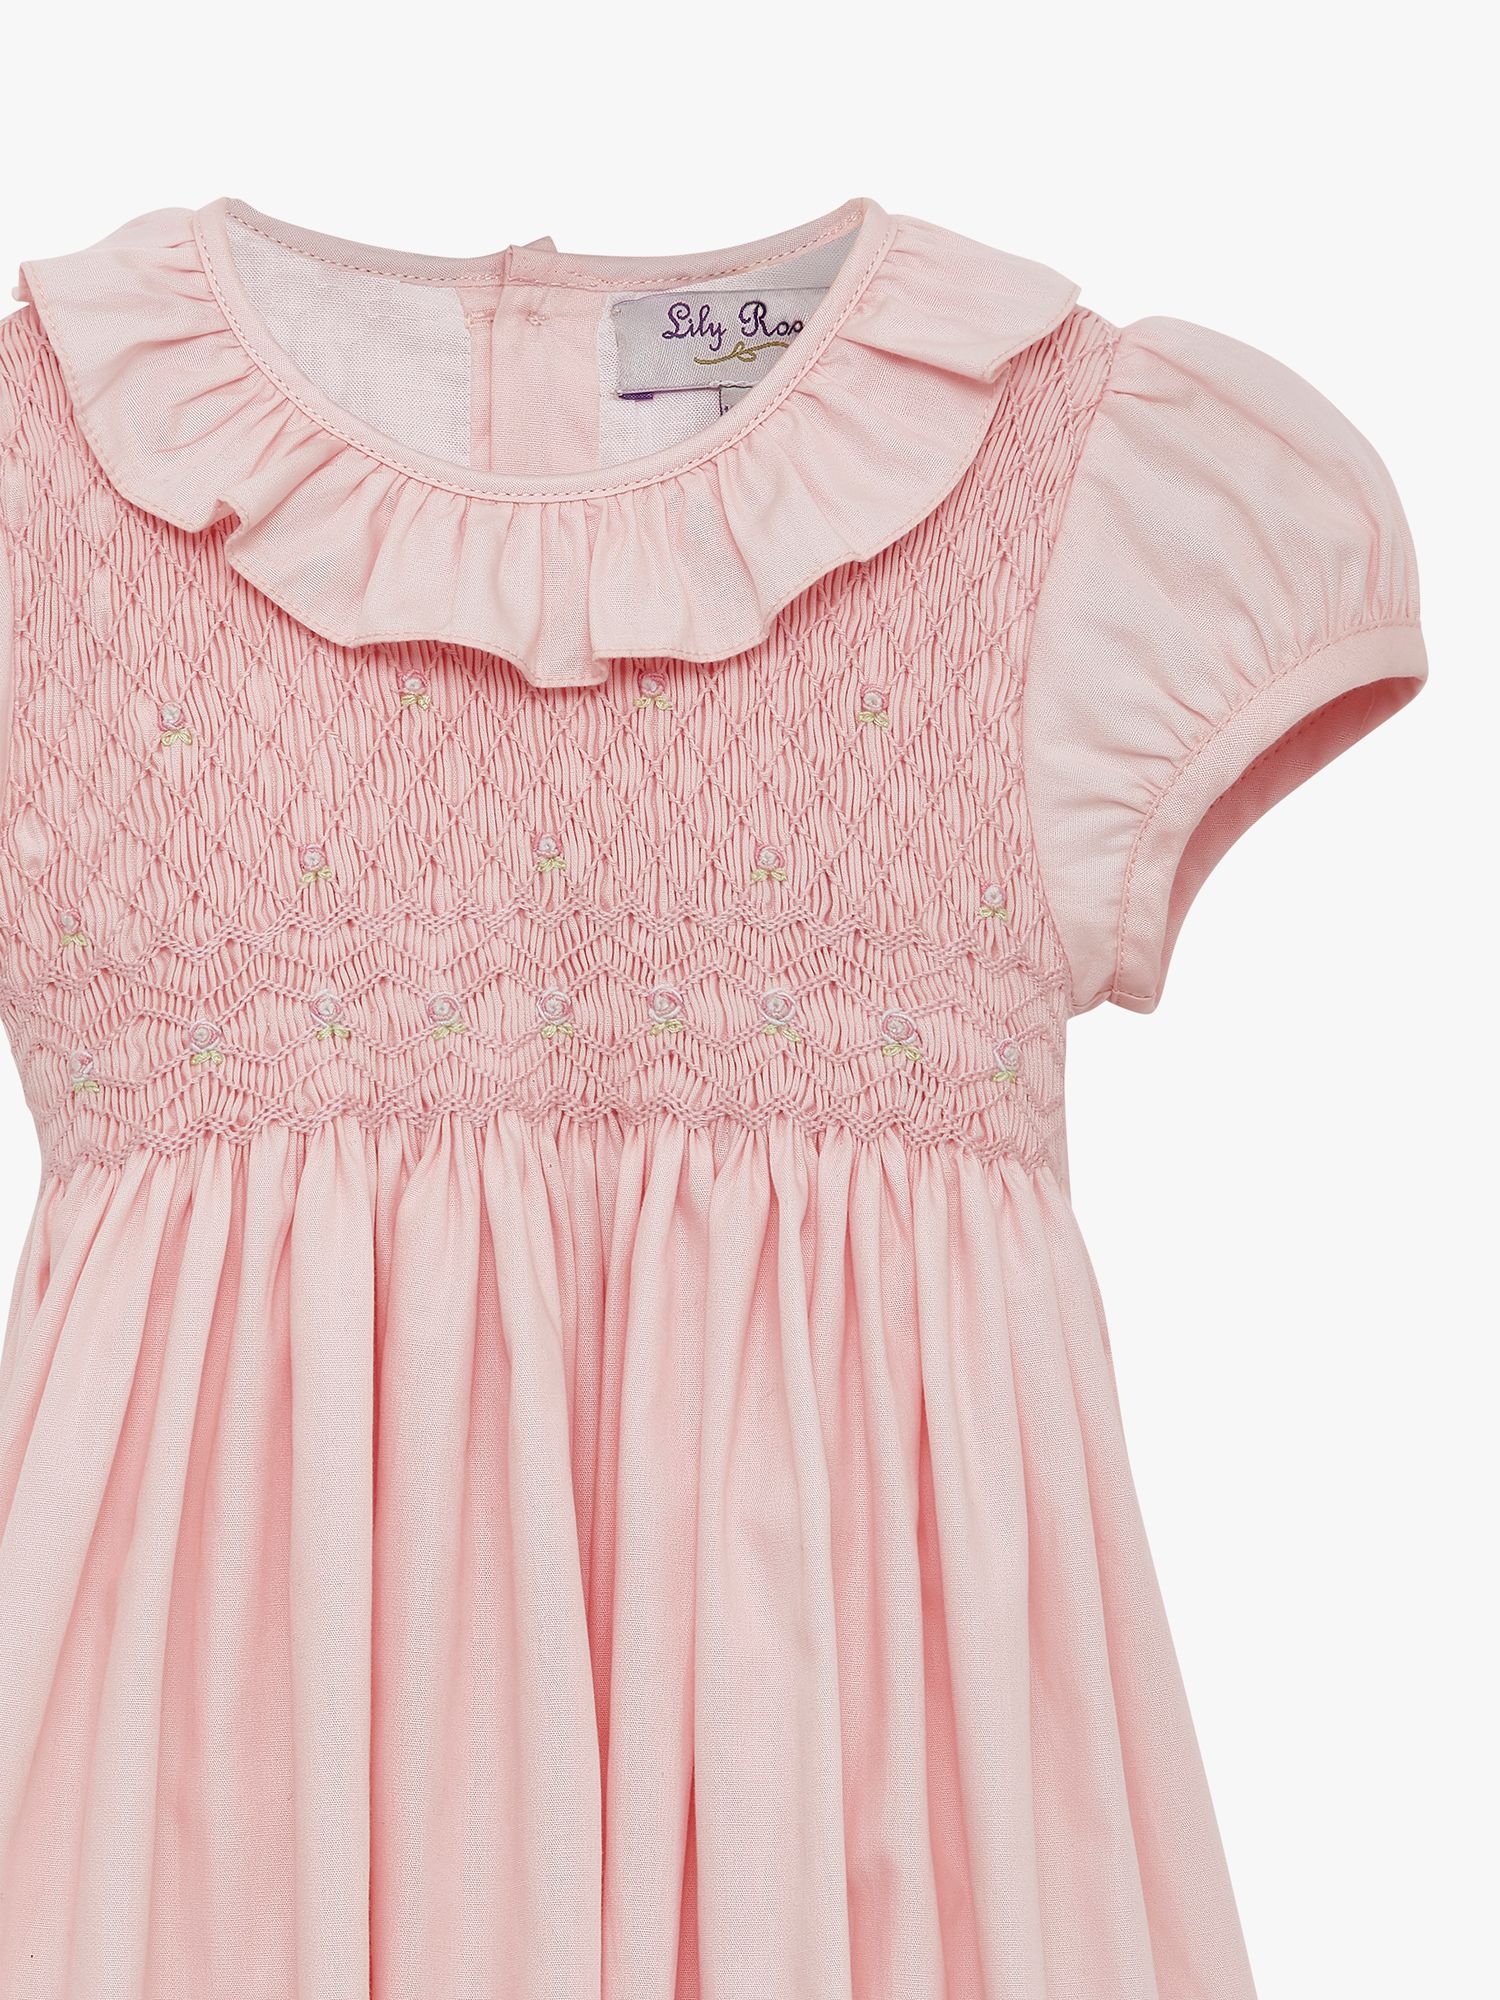 Trotters Willow Baby Hand Smocked Bodice Dress, Peach, 3-6 months